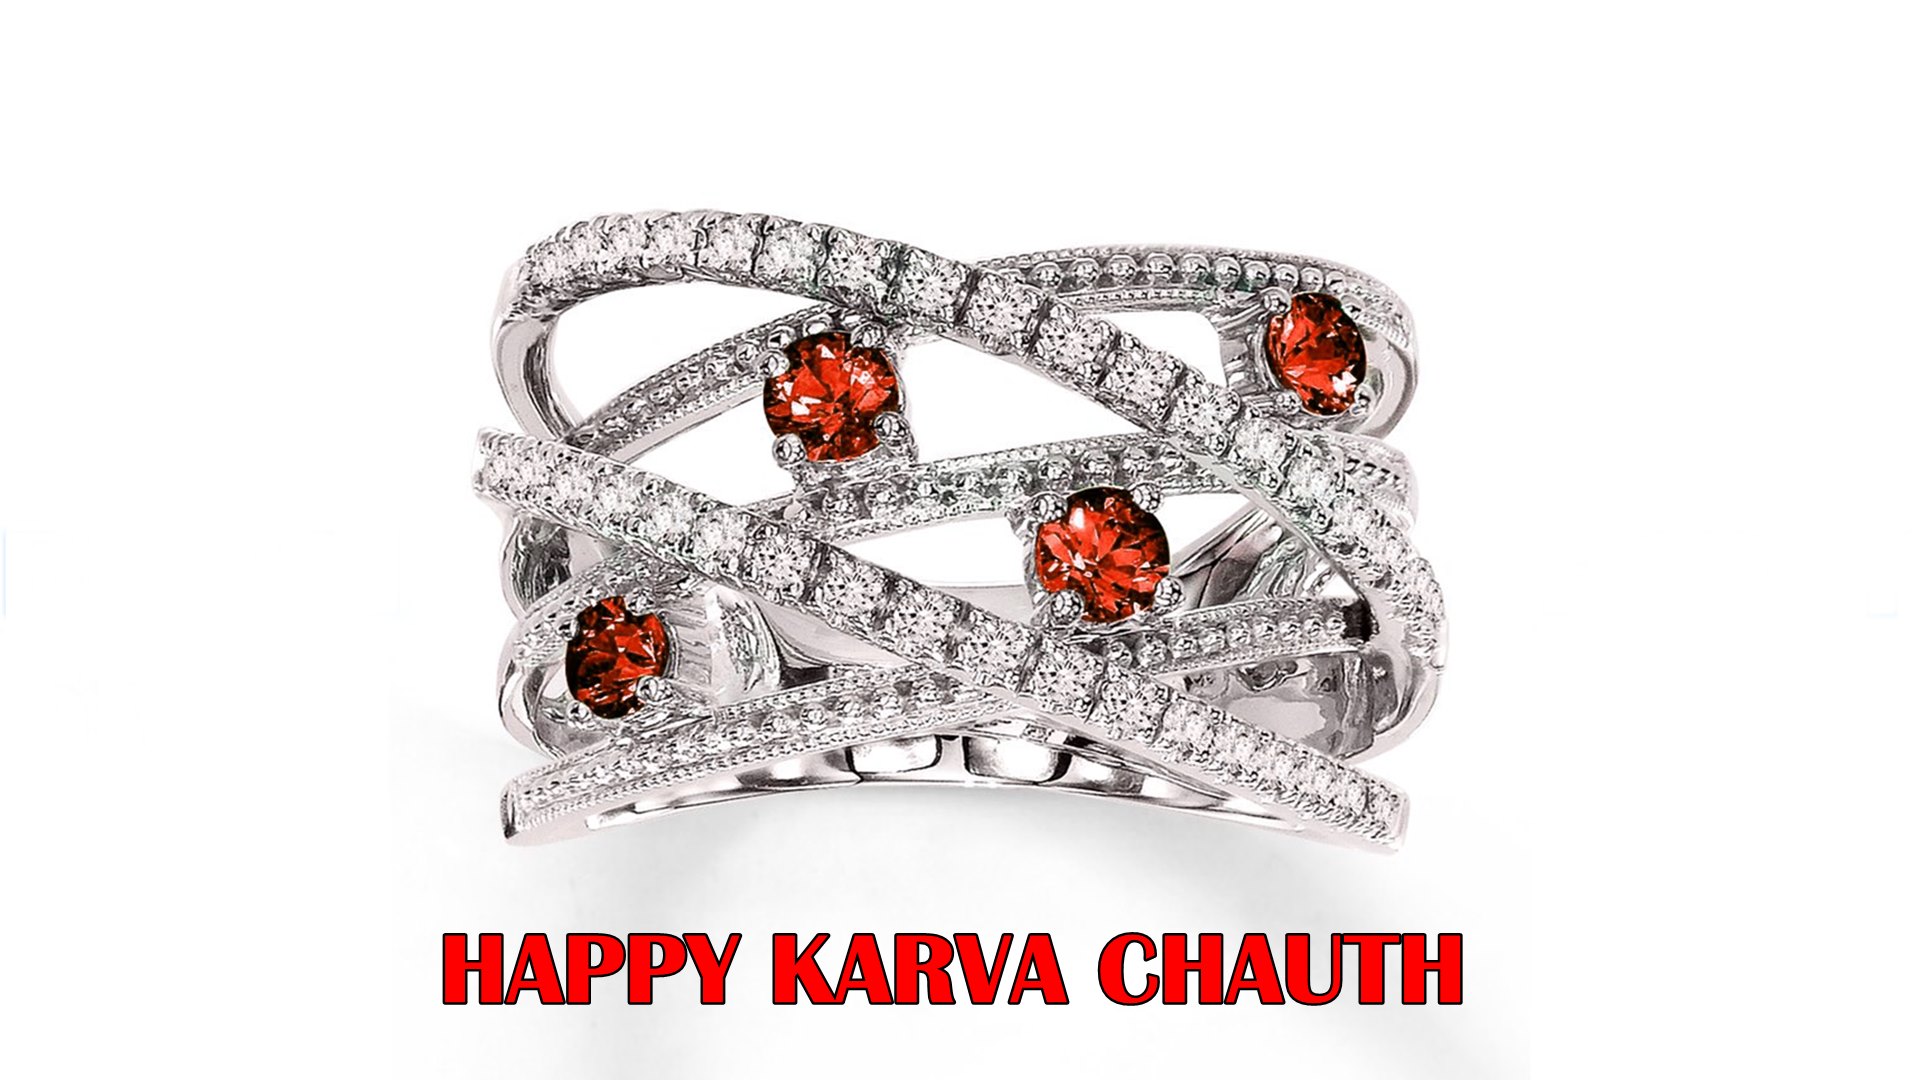 Beautiful Gift For Wife On Karva Chauth Festival Hd - Unusual Diamond And Tanzanite Rings , HD Wallpaper & Backgrounds